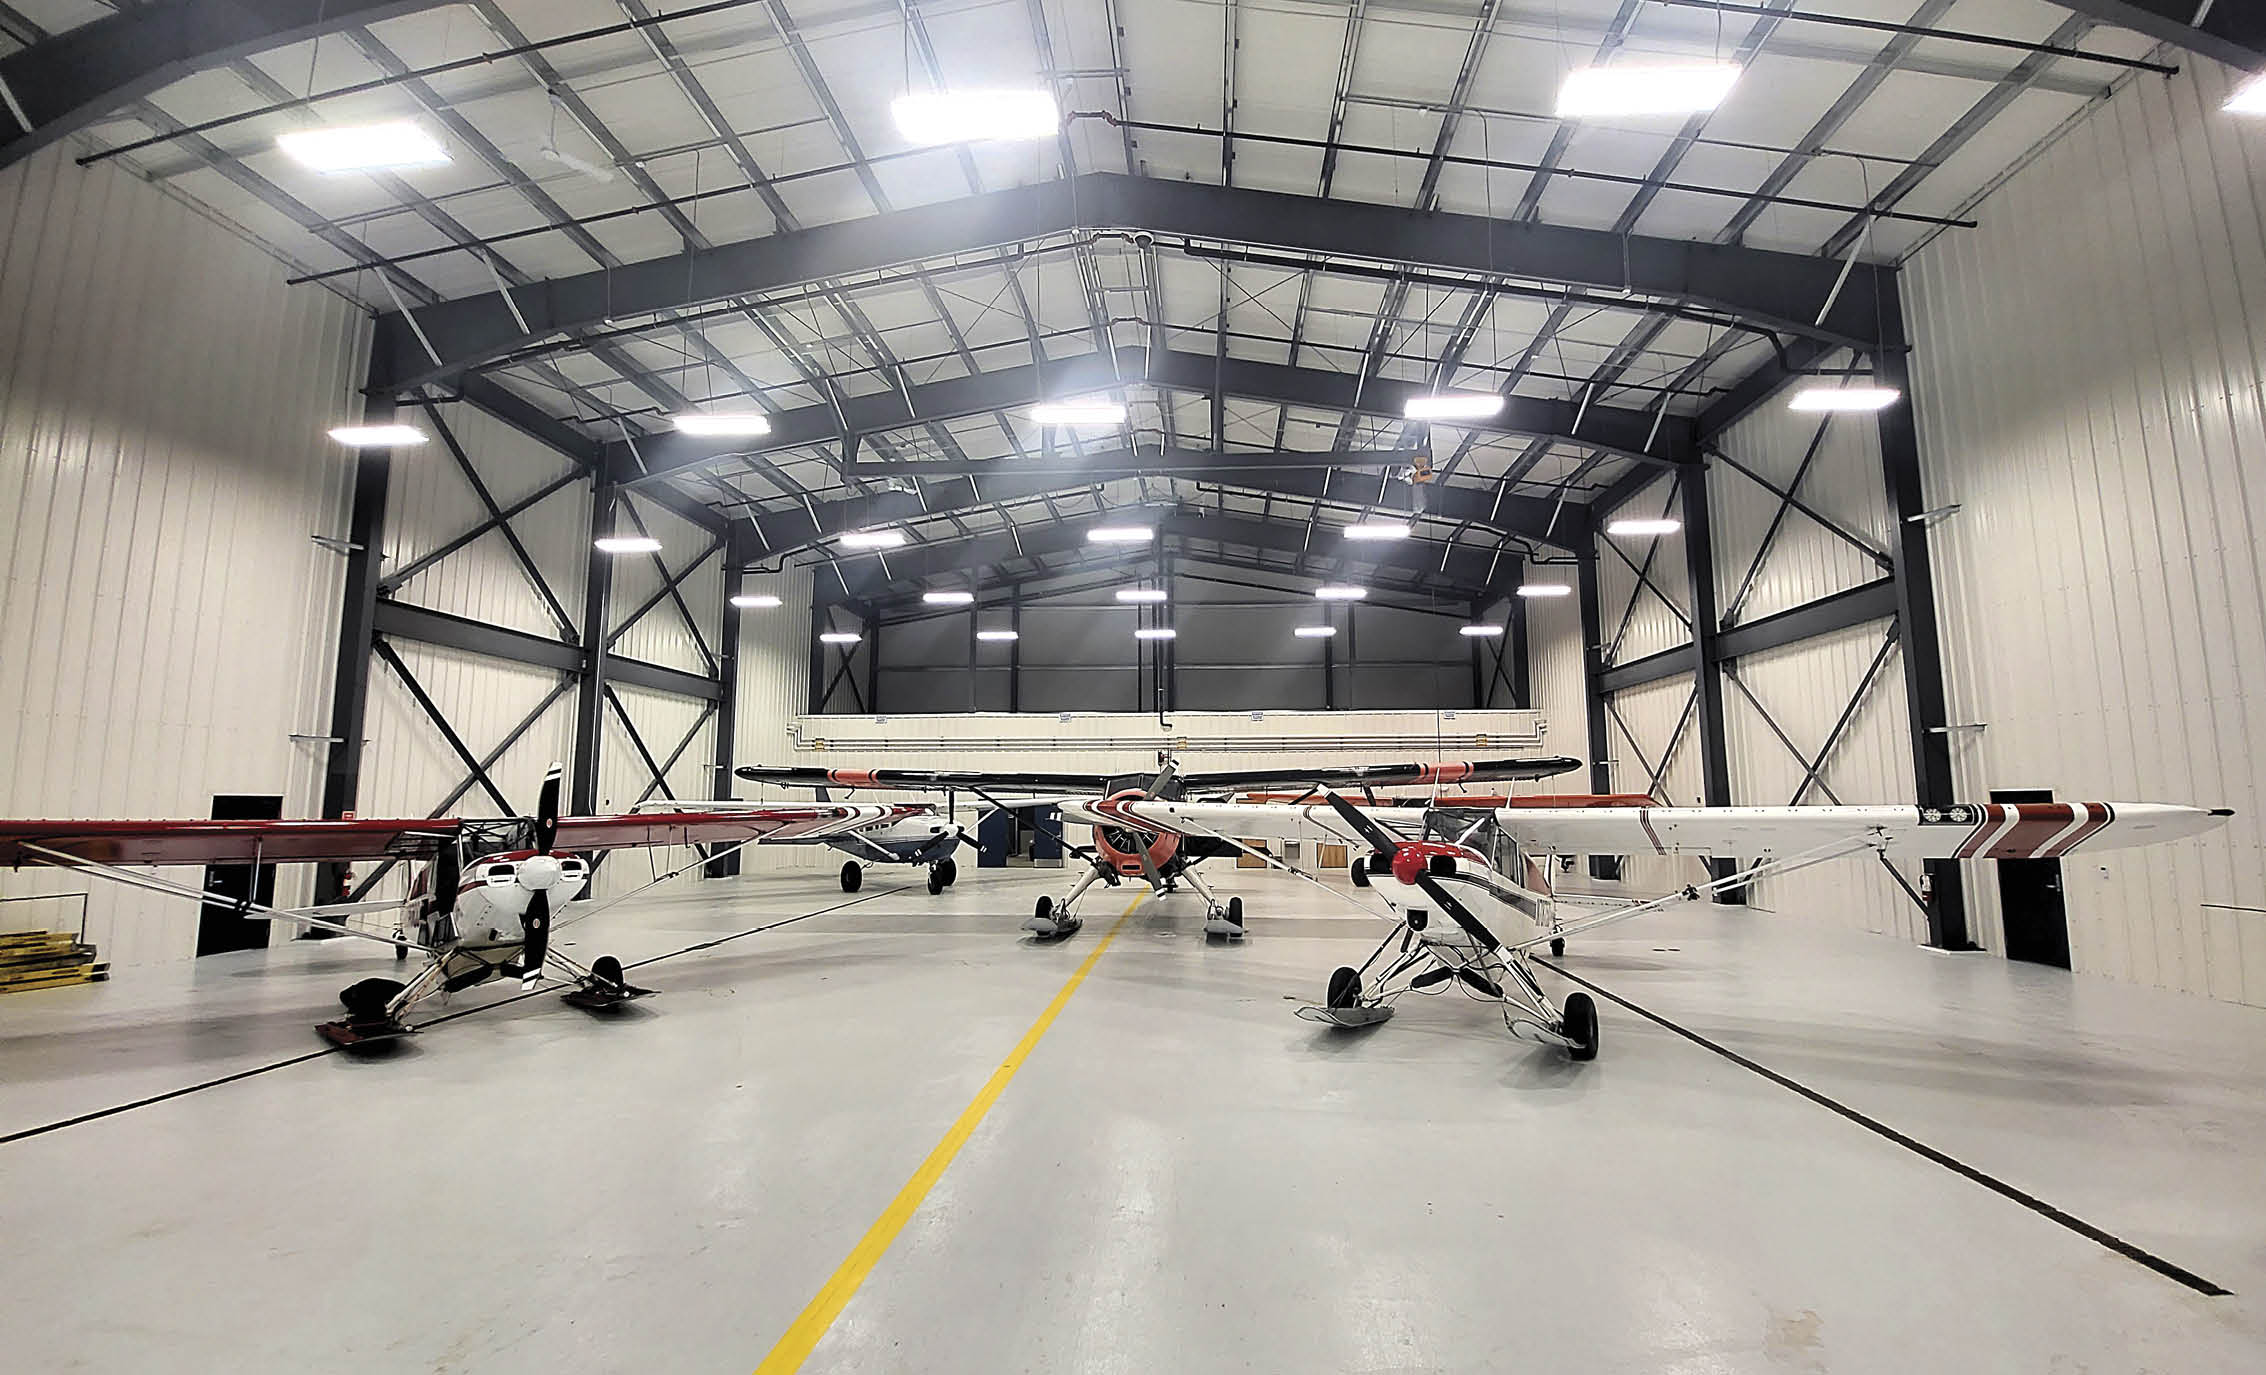 new storage facility for the Department of Interior’s Office of Aviation Services